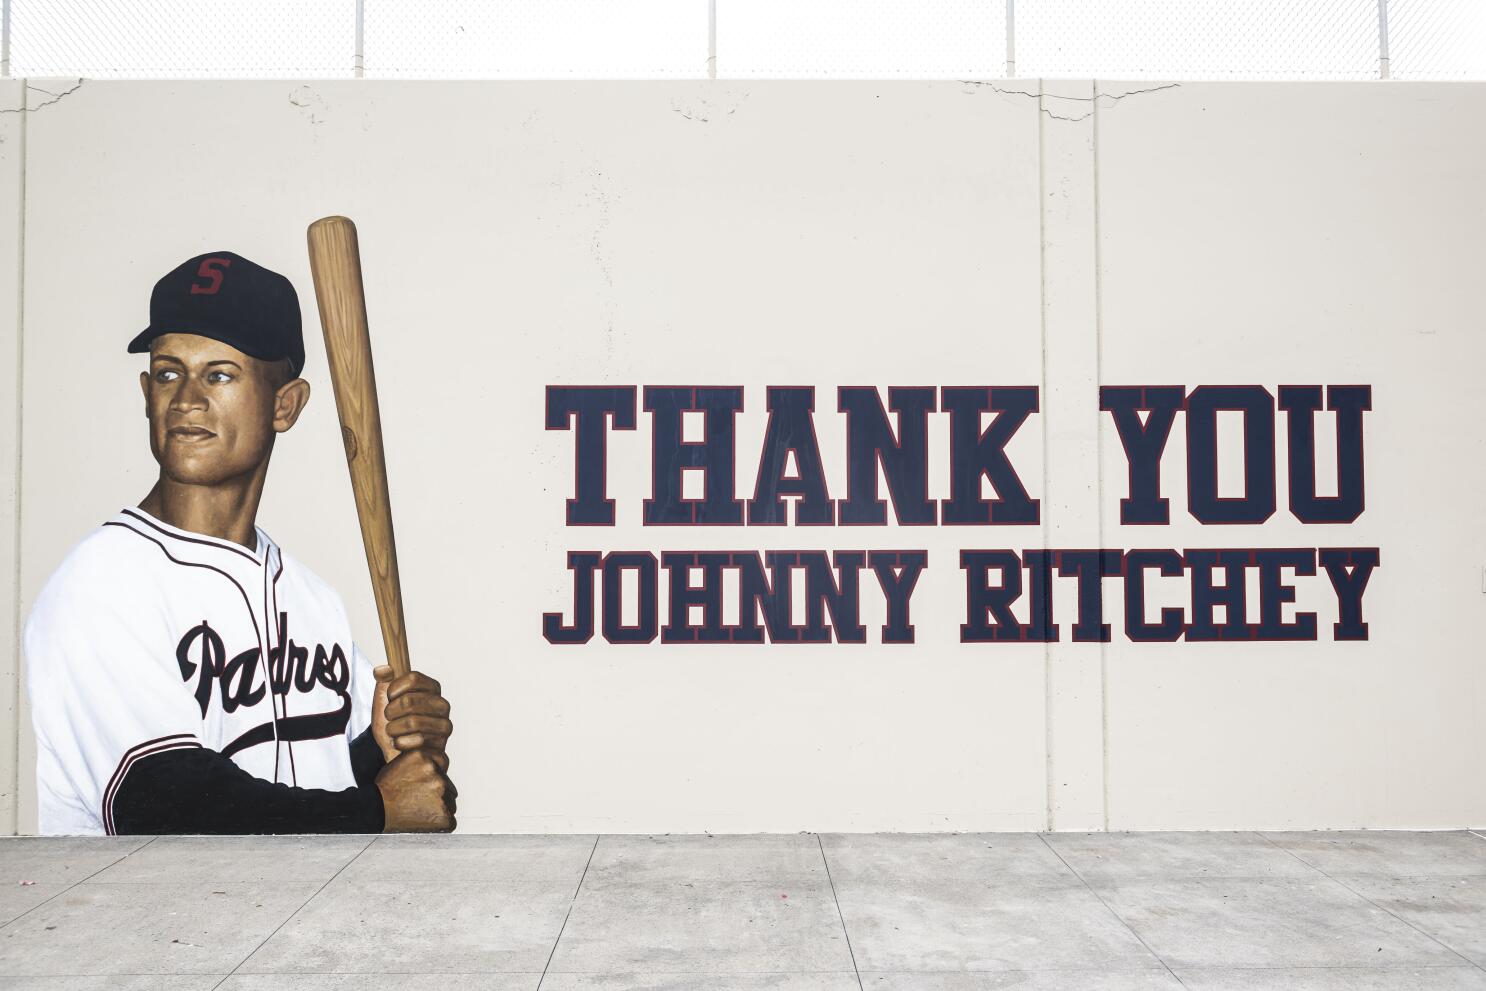 JOHNNY RITCHEY IS THE FIRST AFRICAN AMERICAN BASEBALL PLAYER TO